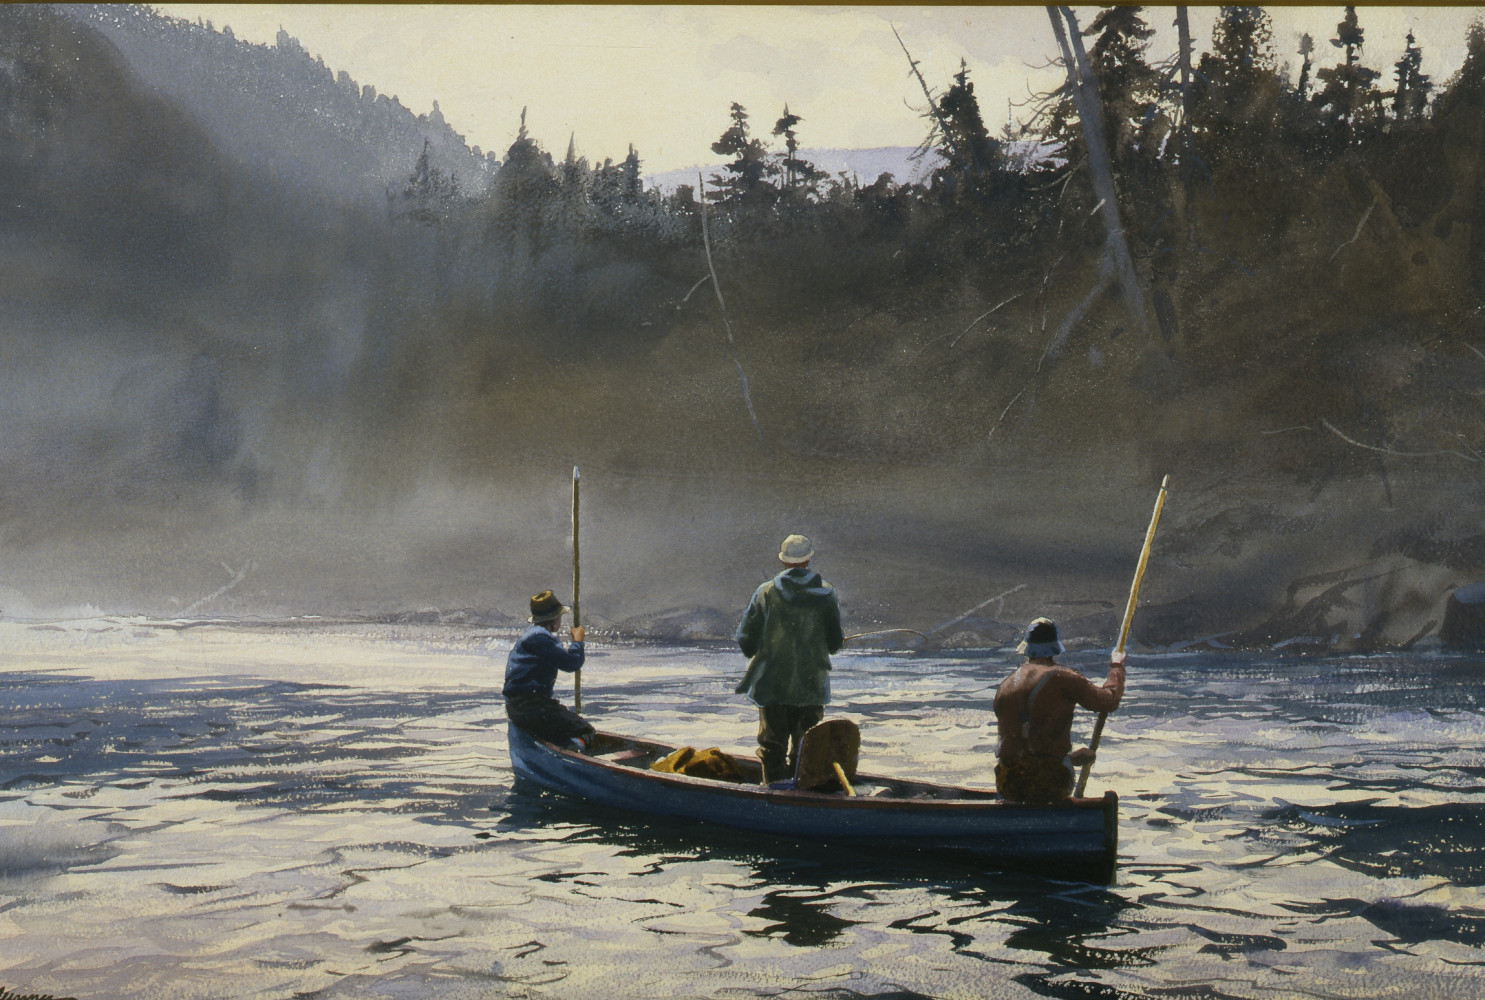 Blue Boat on the Ste Anne, 1958, By Ogden M. Pleissner (American, 1905—1983);  Watercolor on paper; 17 1/4 x 27 1/2 inches;  Collection of Shelburne Museum, gift of Marion W.G.  Pleissner. 1986-98.1.